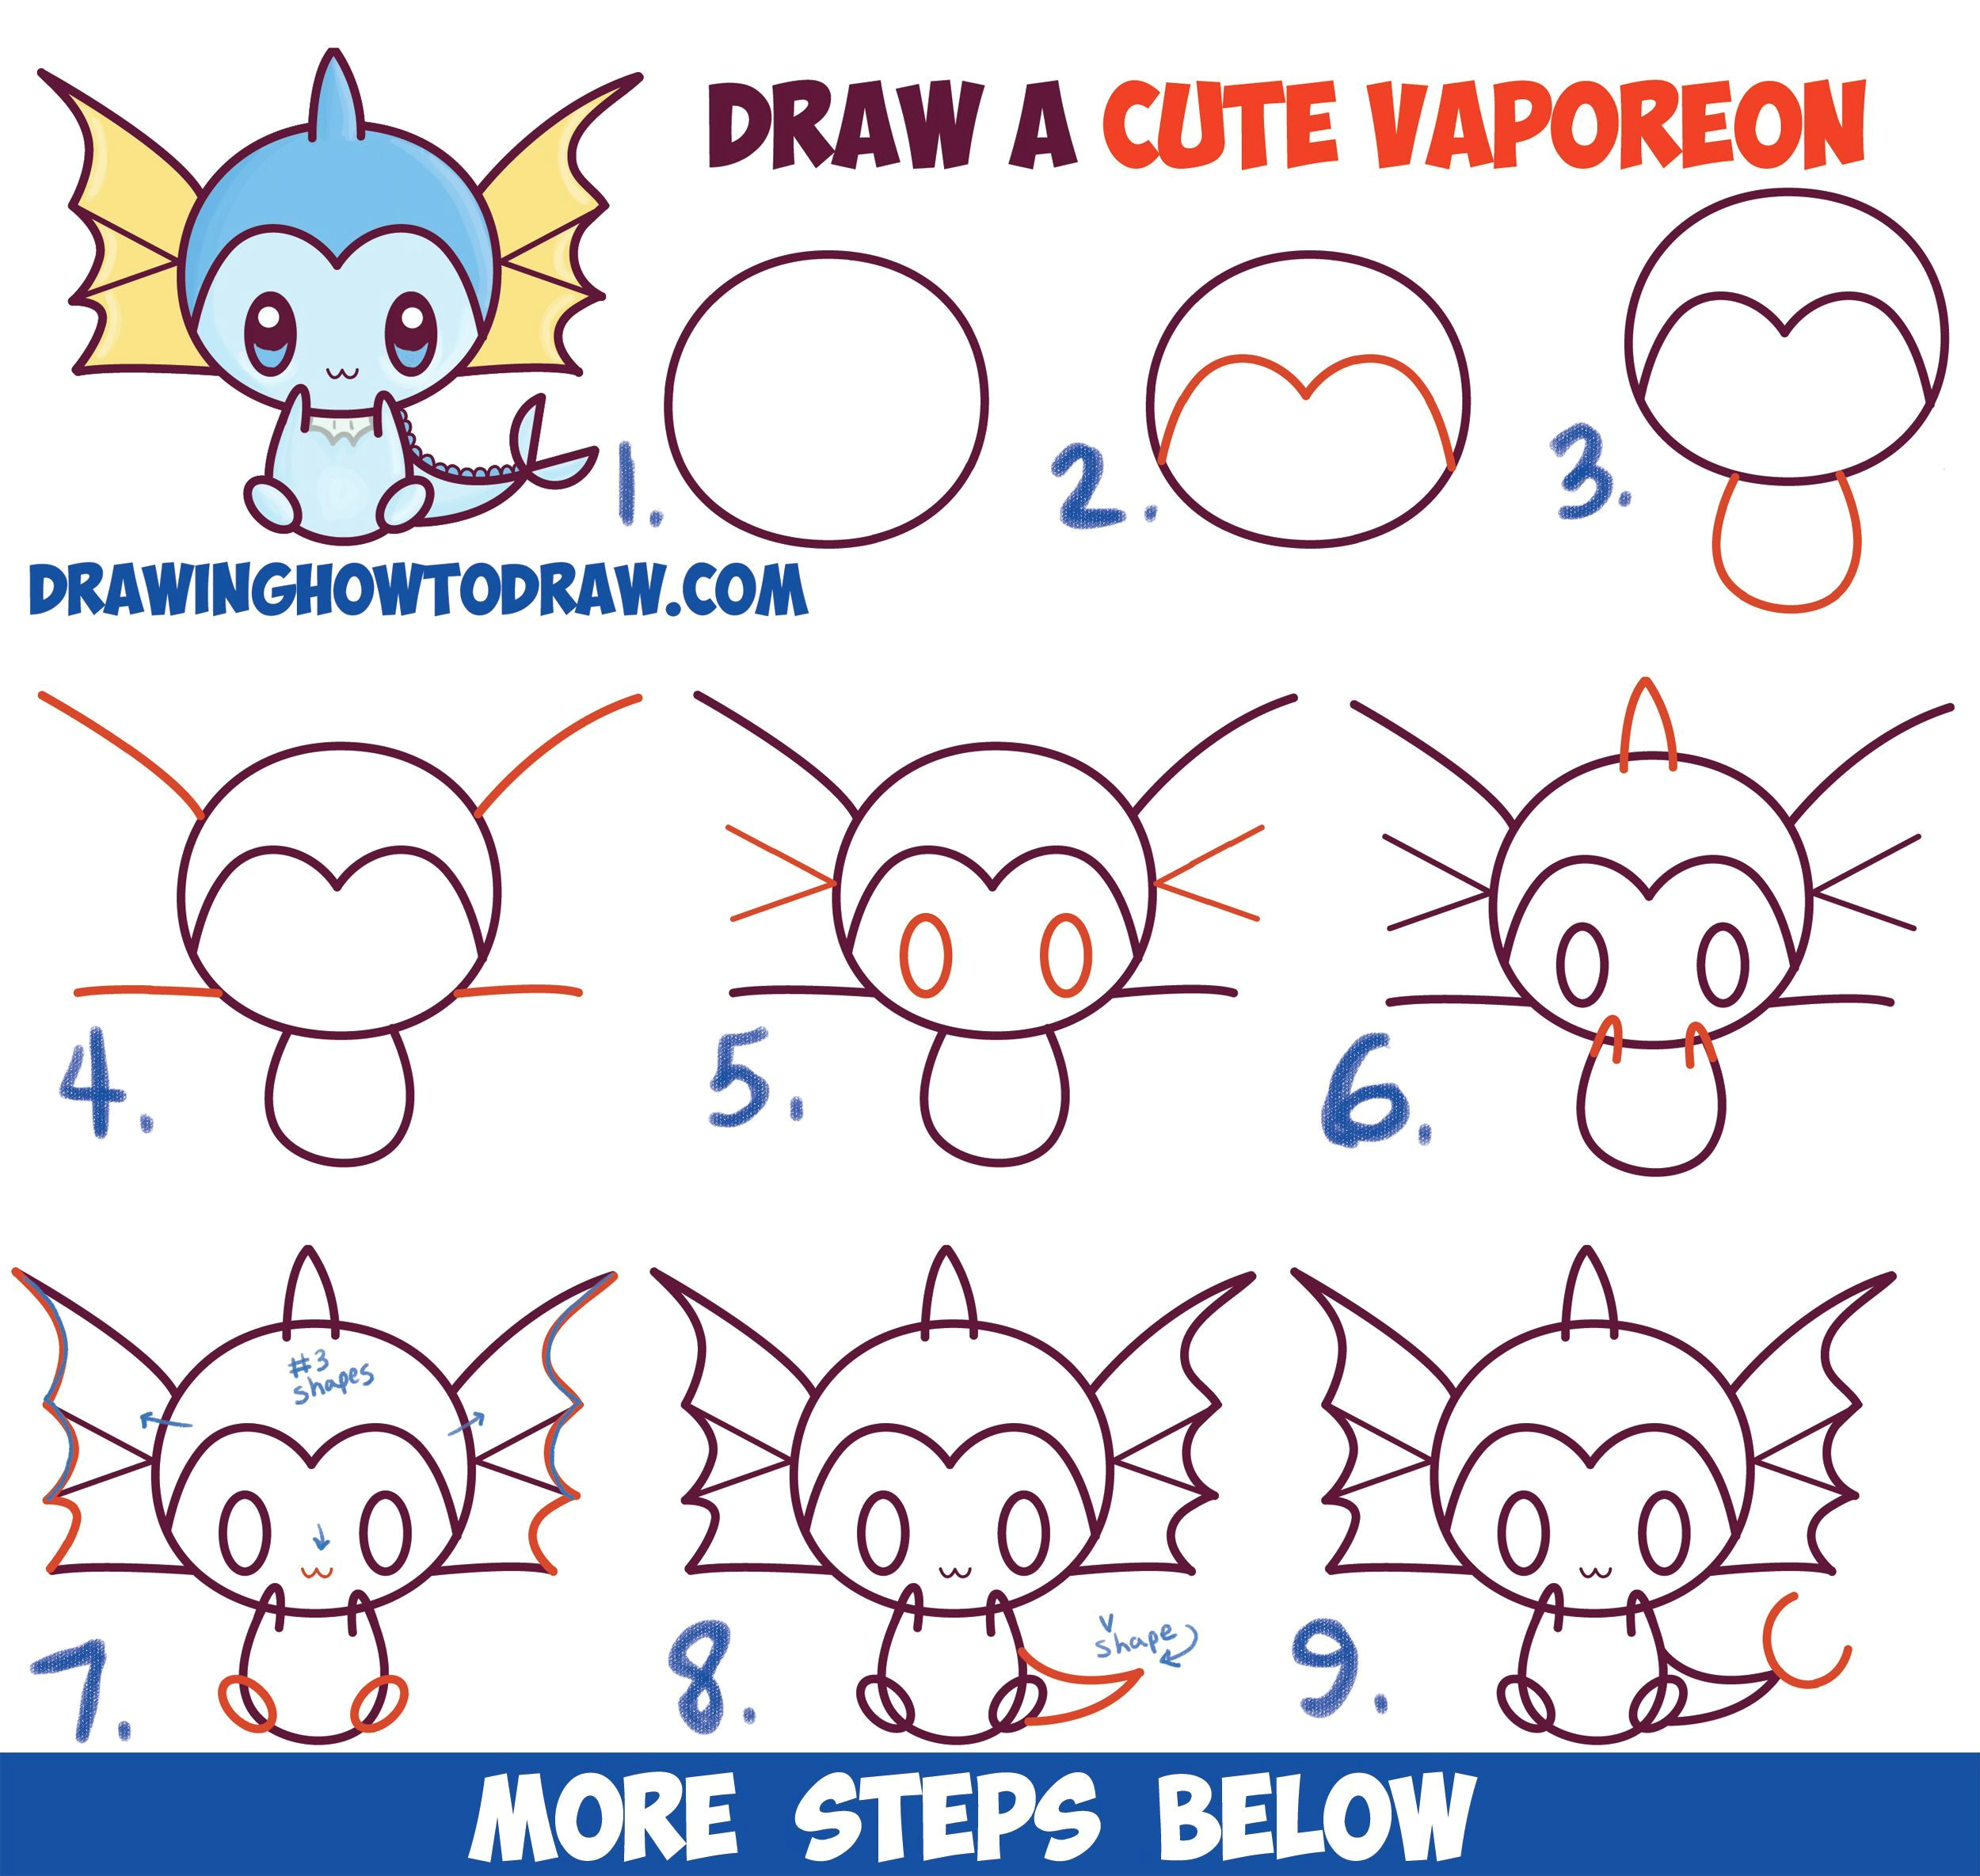 how to draw cute kawaii chibi vaporeon from pokemon easy step by step drawing lesson for beginners